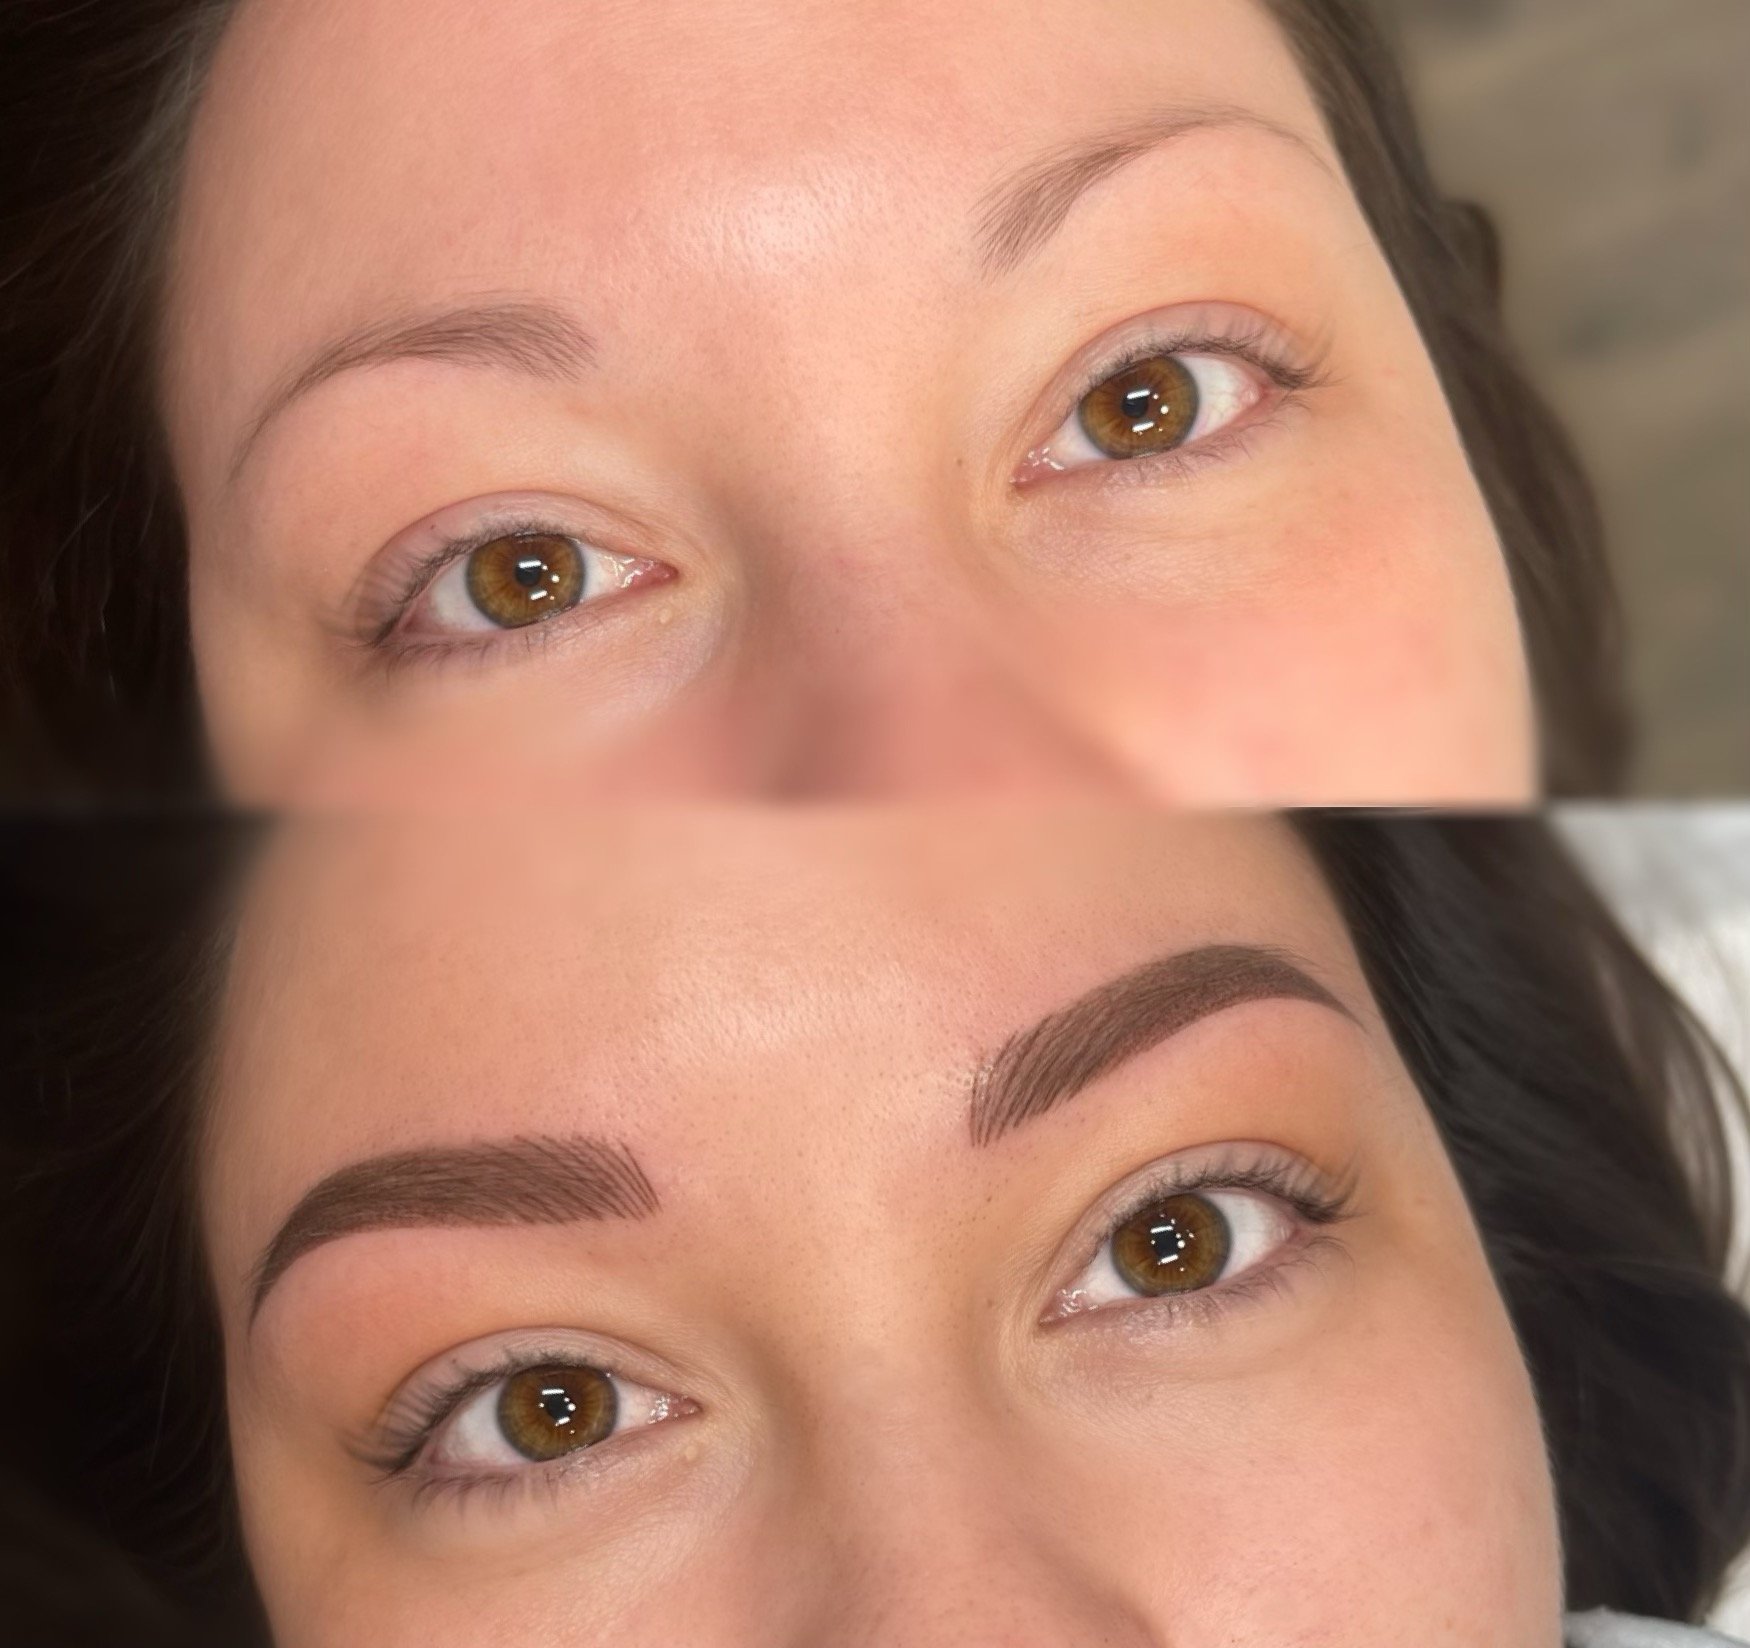 Elevate your look with our combo brow transformation! 😍✨ Experience the best of both worlds with natural-looking hair strokes and defined shape that lasts. Say hello to effortlessly flawless brows, 24/7. 

Permanent Makeup by- Shemina 
@dayam_nice_b